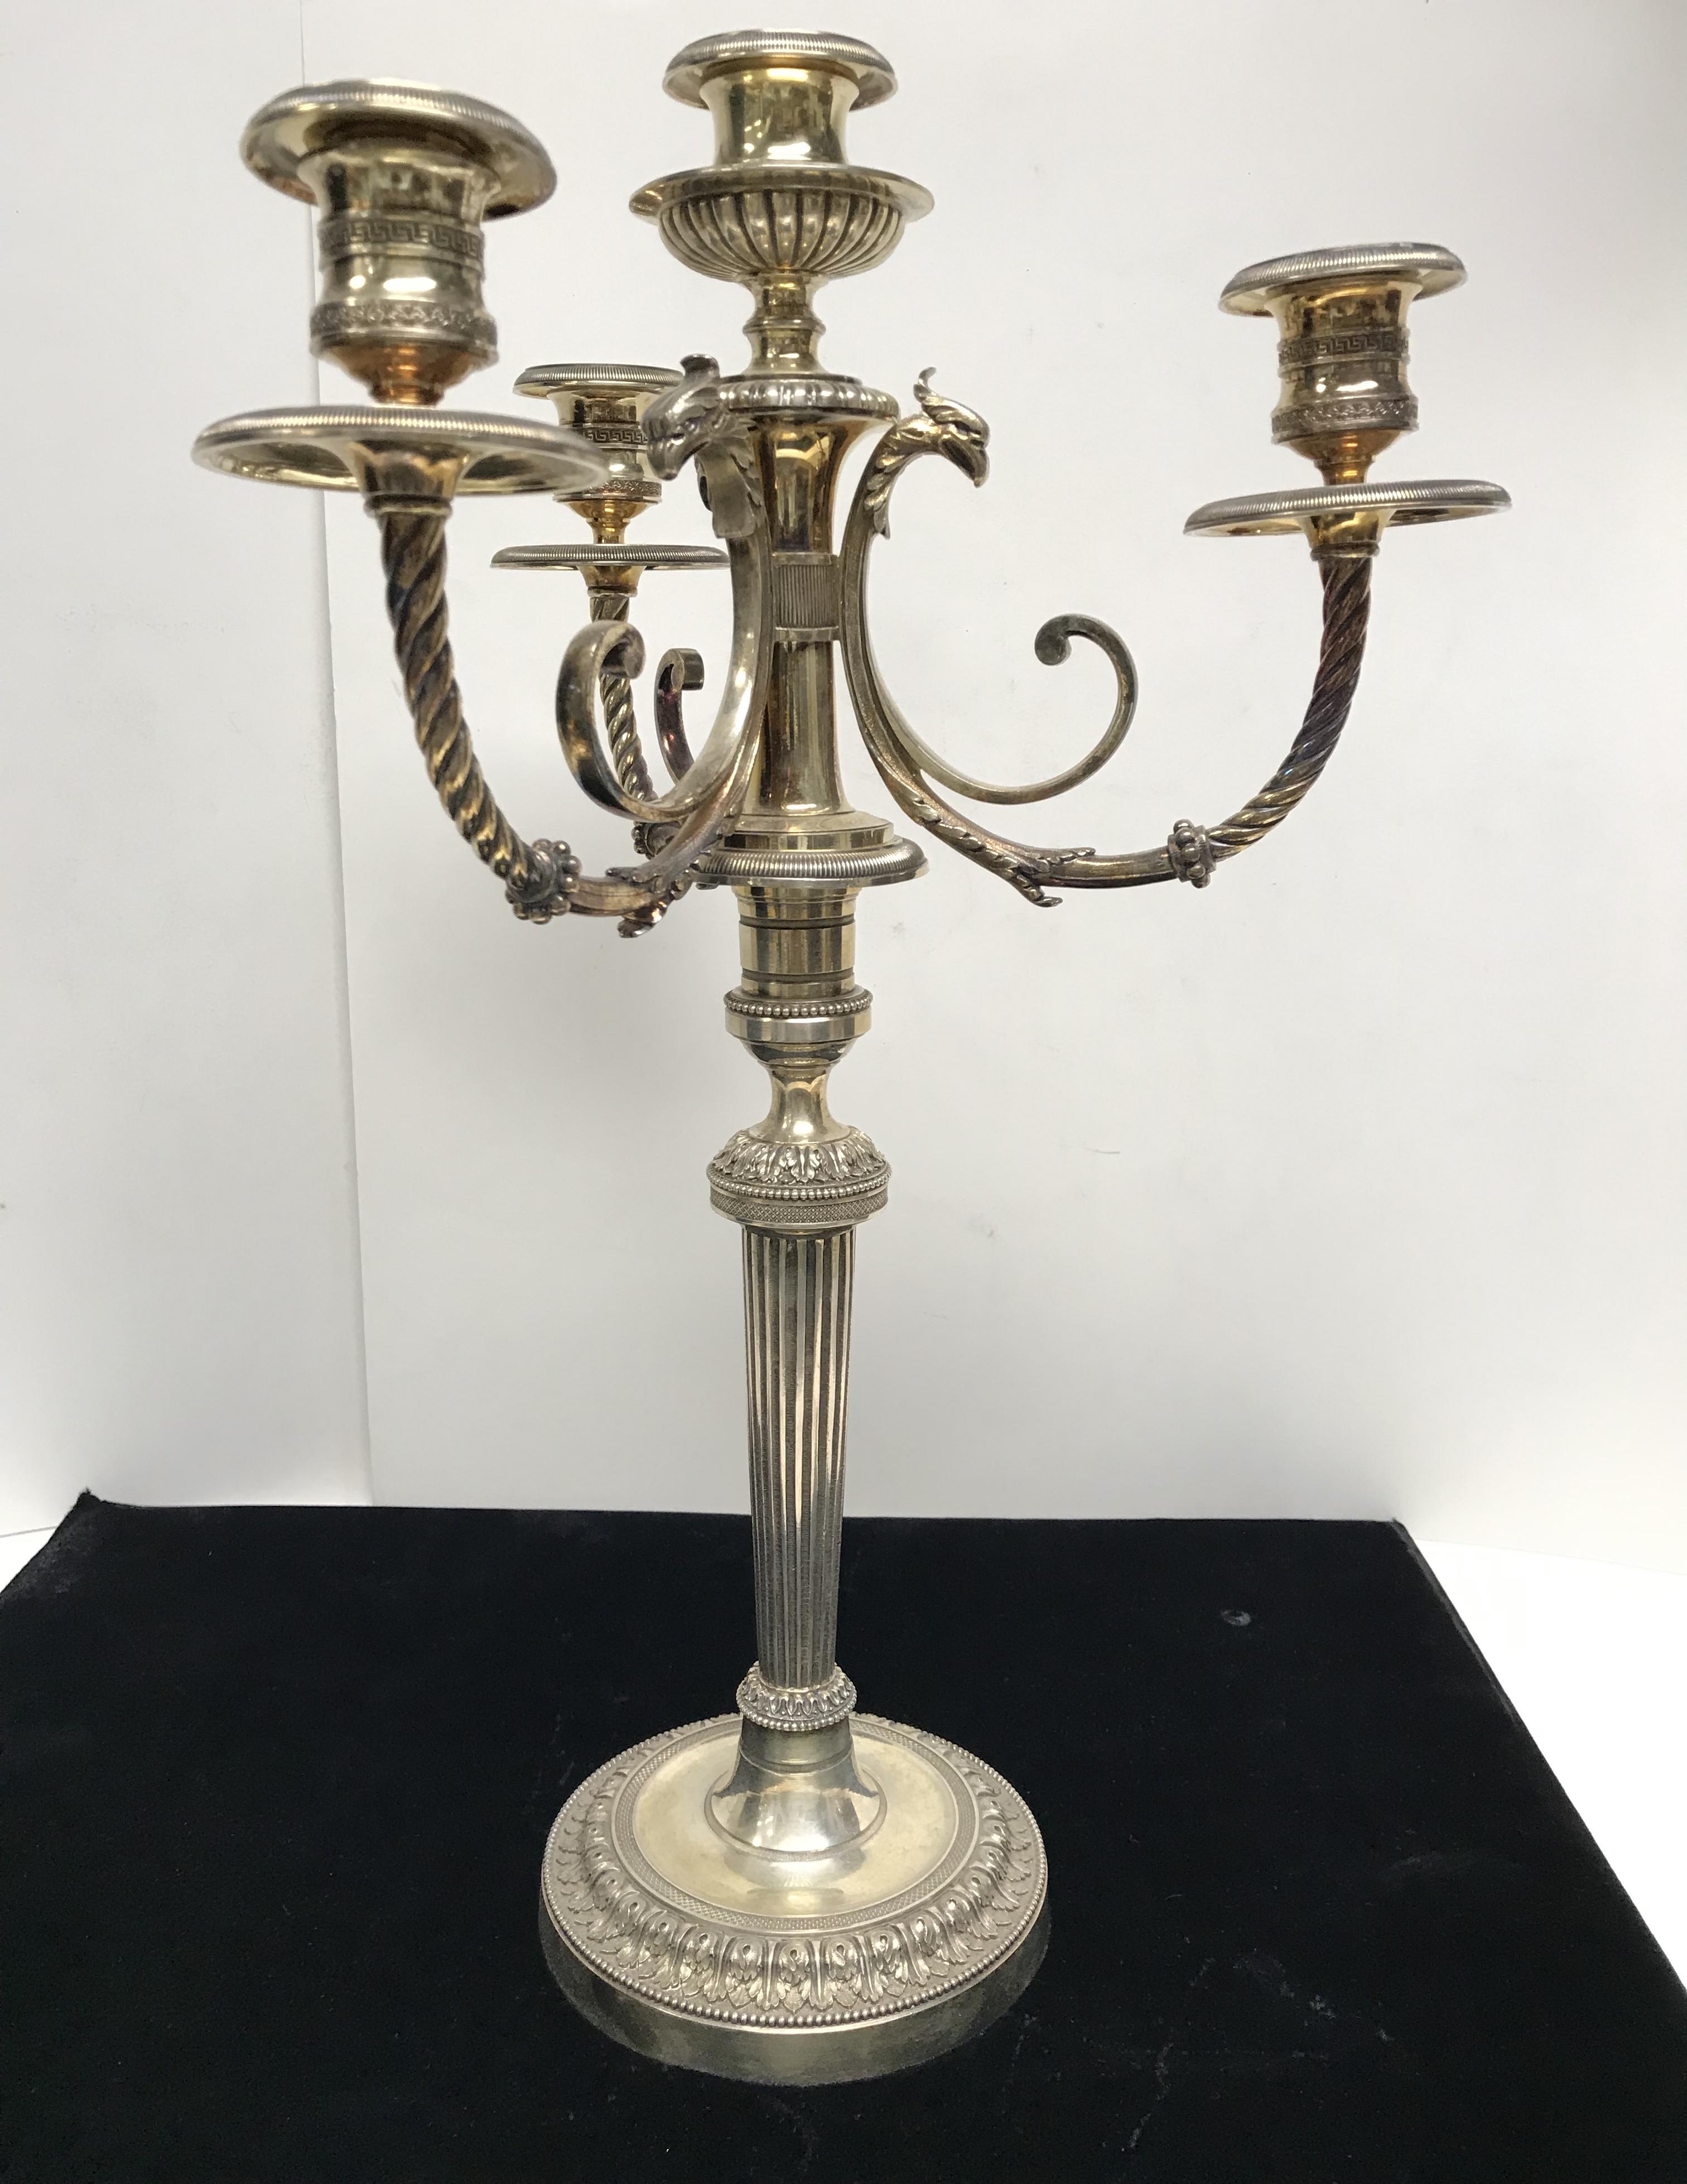 Pair of gilt-metal four-light candelabras, probably French, c. 1900, designed in the Empire style, the base with acanthus borders, the body having reeded, beaded, fluted decorations and fluted stems, the torsed arms ending in gryphon heads, with